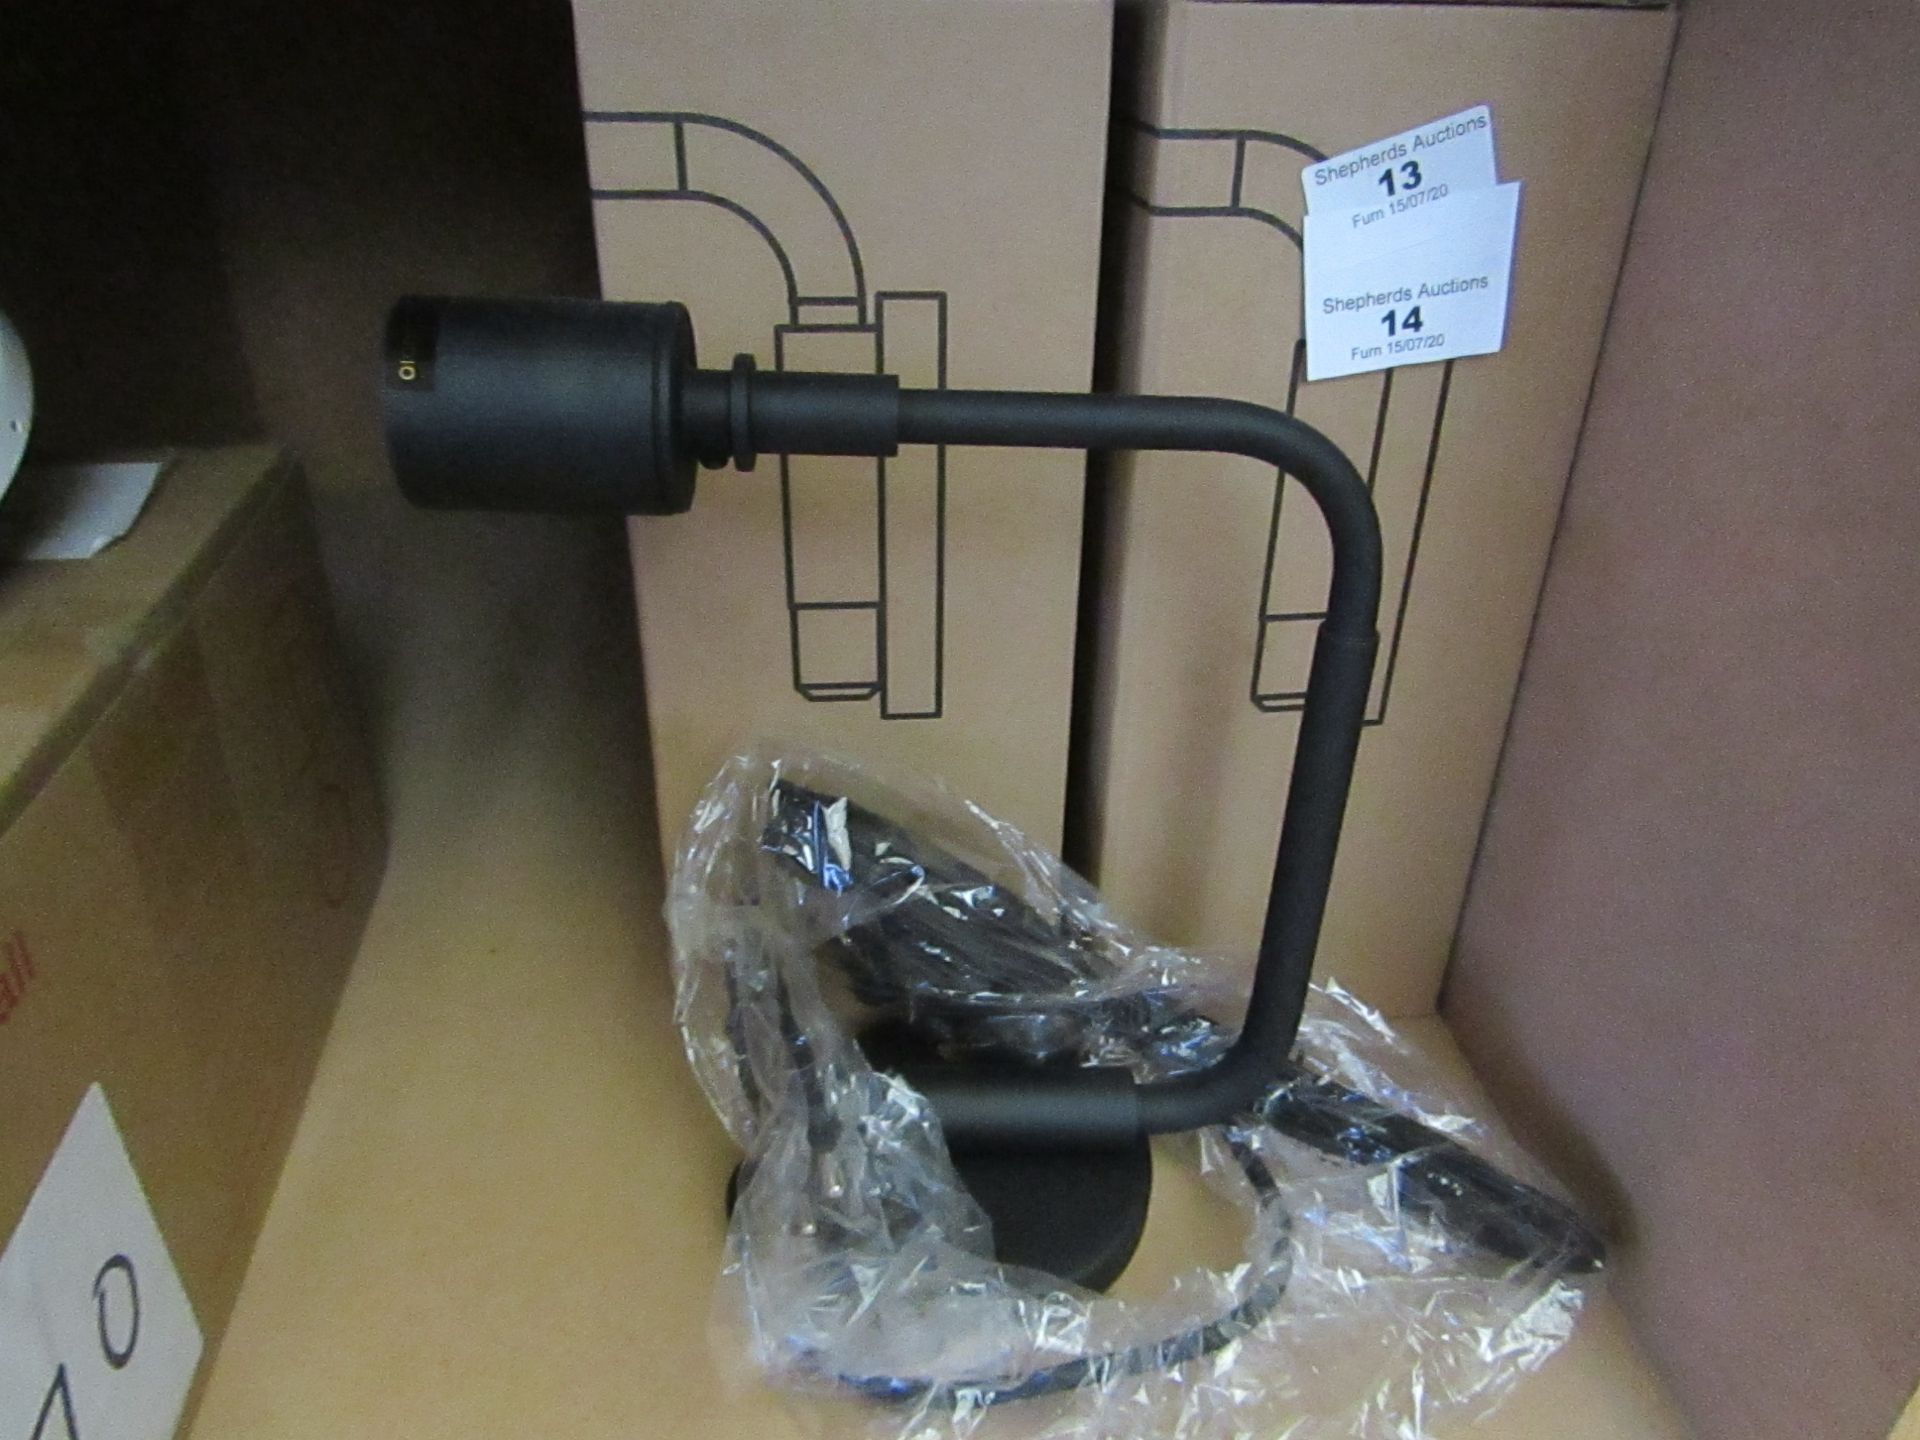 | 1X | STAPLE WALL LAMP | UNTESTED BUT LOOKS UNUSED (NO GUARANTEE), BOXED | RRP - |